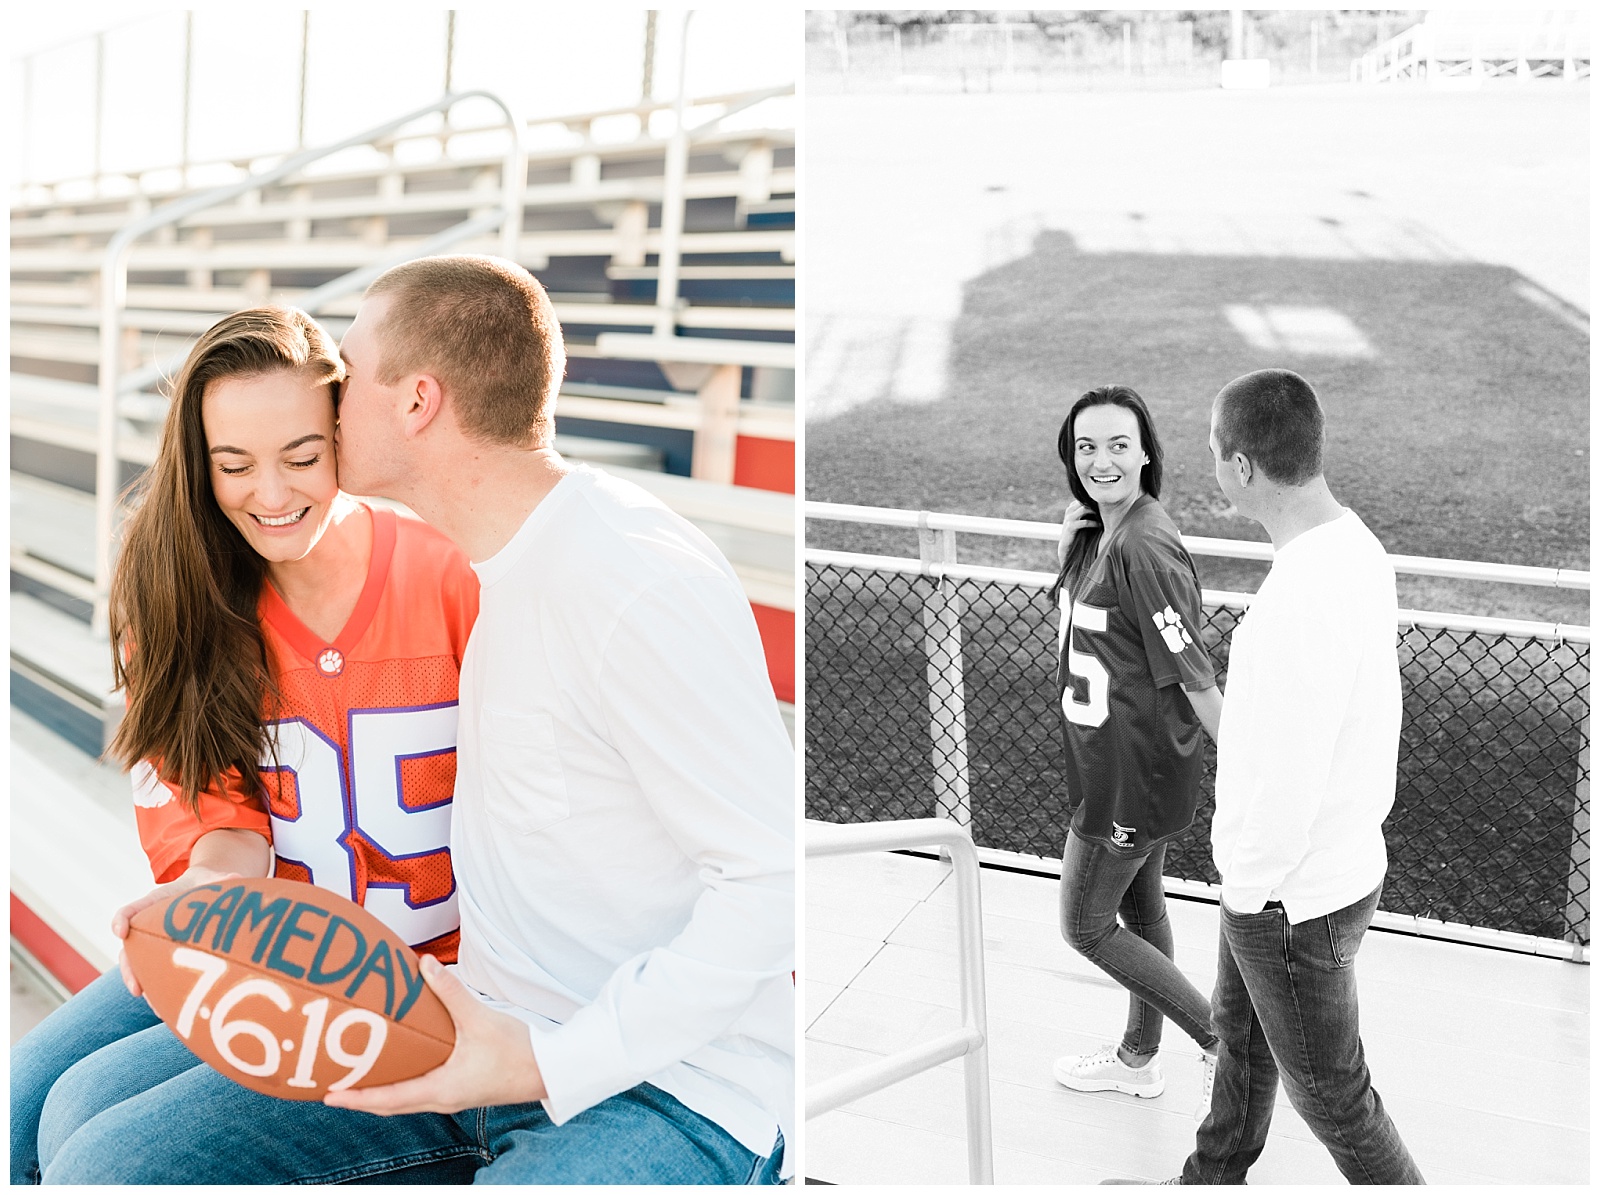 New Jersey, Engagement Session, Wedding Photographer, NFL, Coach, LA Chargers, Football, Athletic, Sporty, Jersey, Save the Date